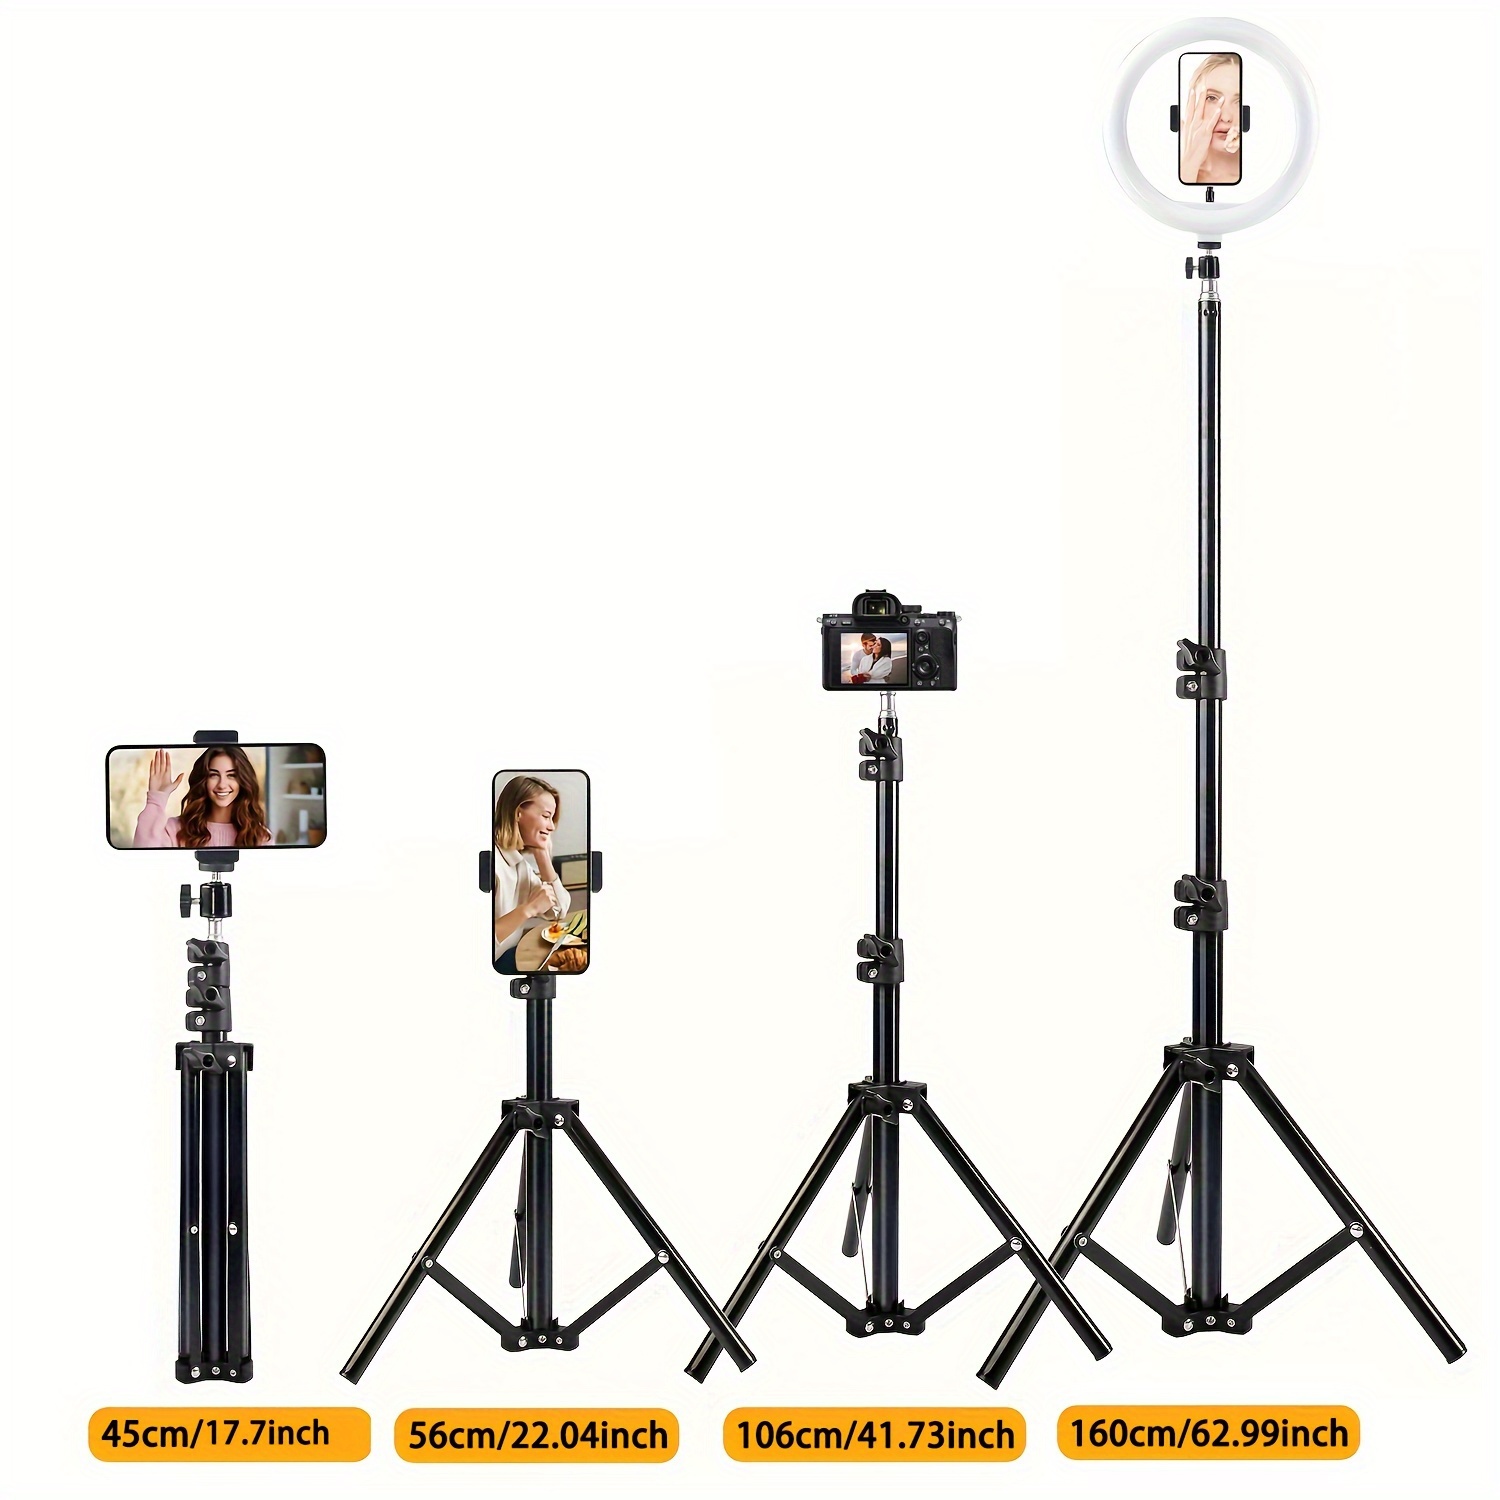 

Iron Tripod Stand With Adjustable Height And Foldable Design, Non-waterproof, Multifunctional 63-inch Tripod With Phone Holder Clip For Cameras And Smartphones